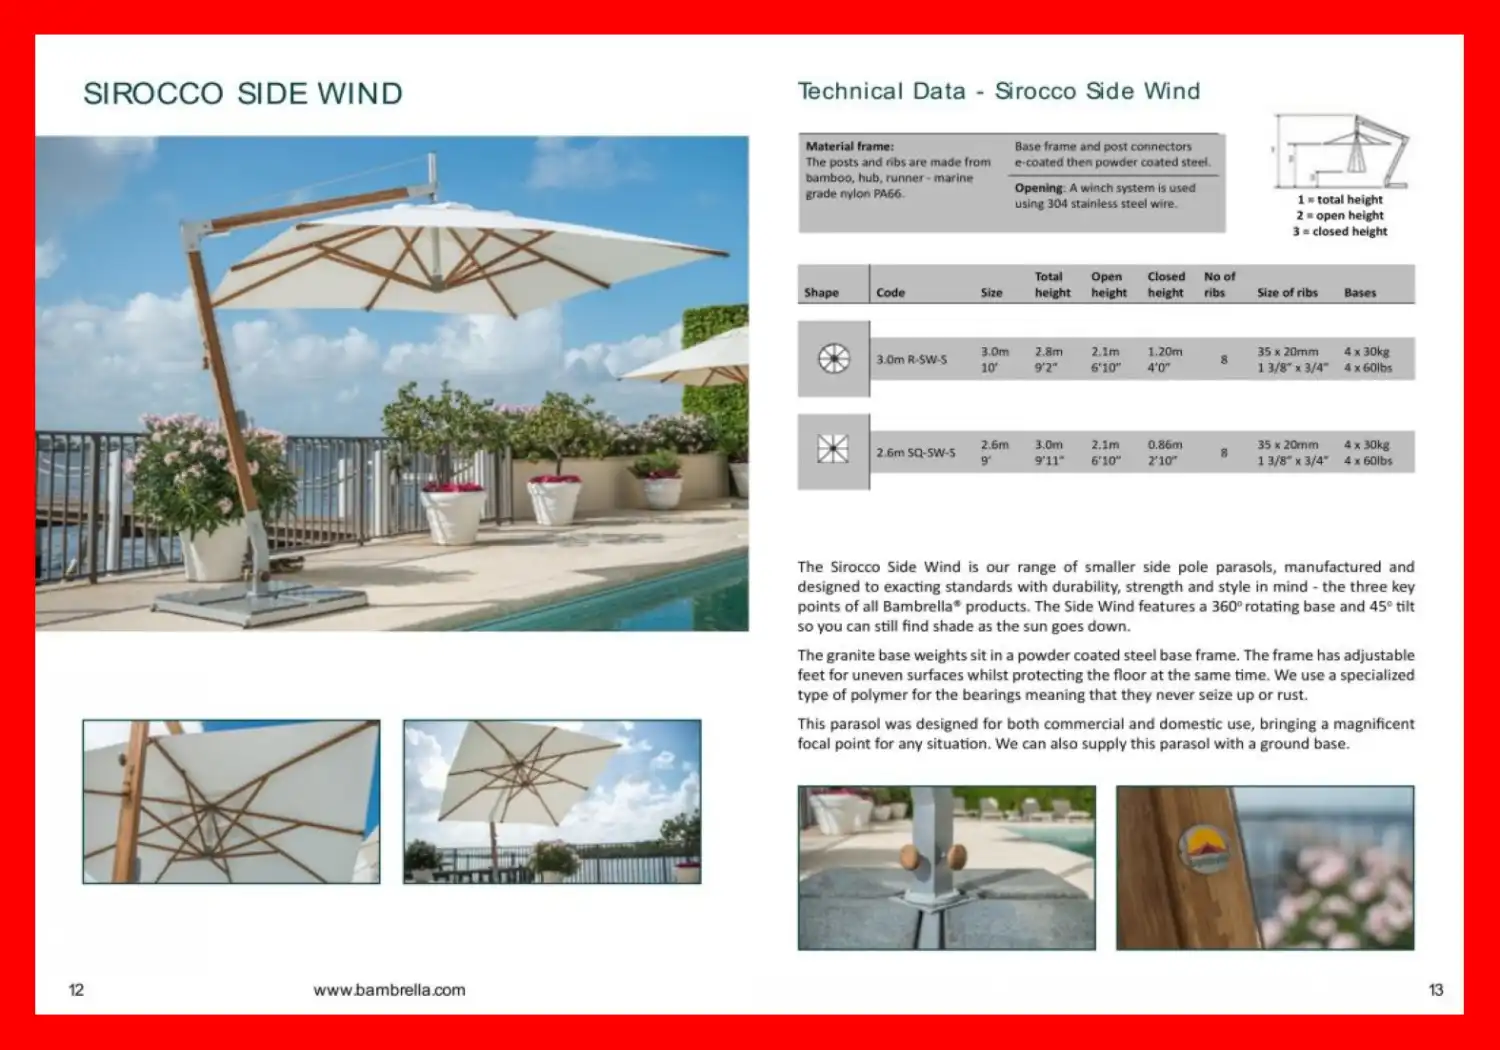 SIROCCO SIDE WIND (BAMBOO) CANTILEVER